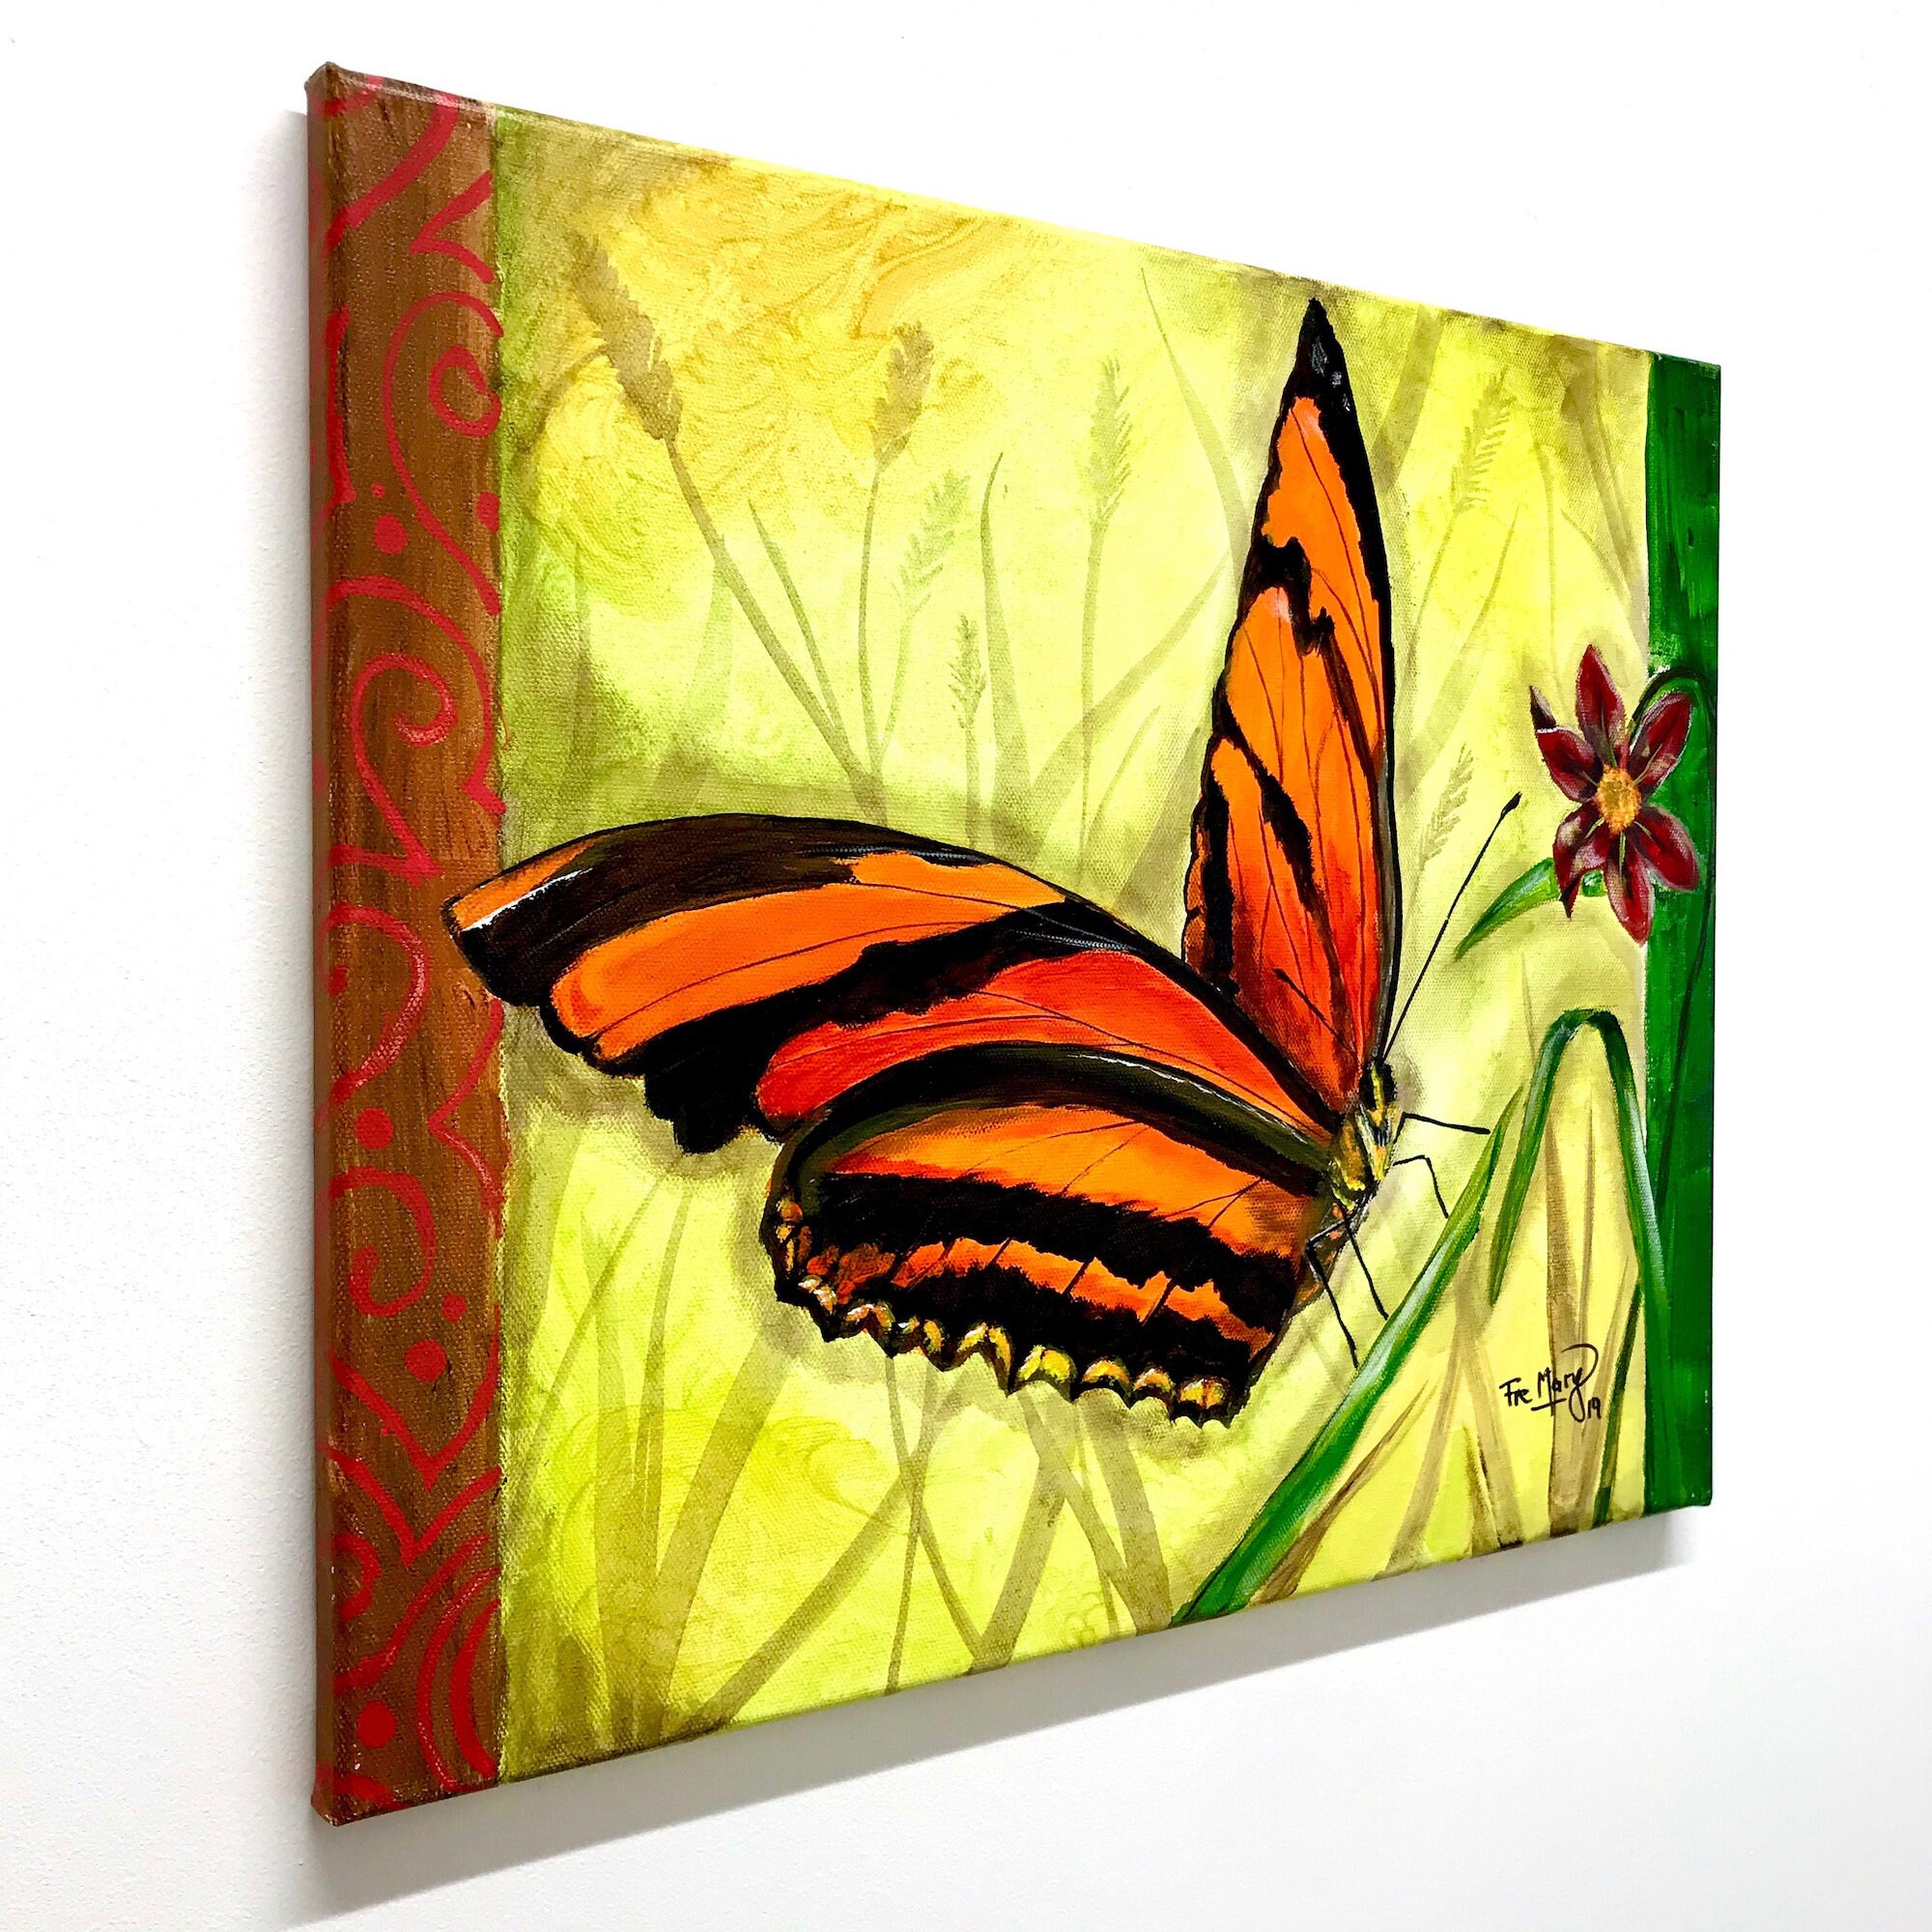 Butterfly acrylic painting on canvas 46x38cm size/Nature lover | Etsy